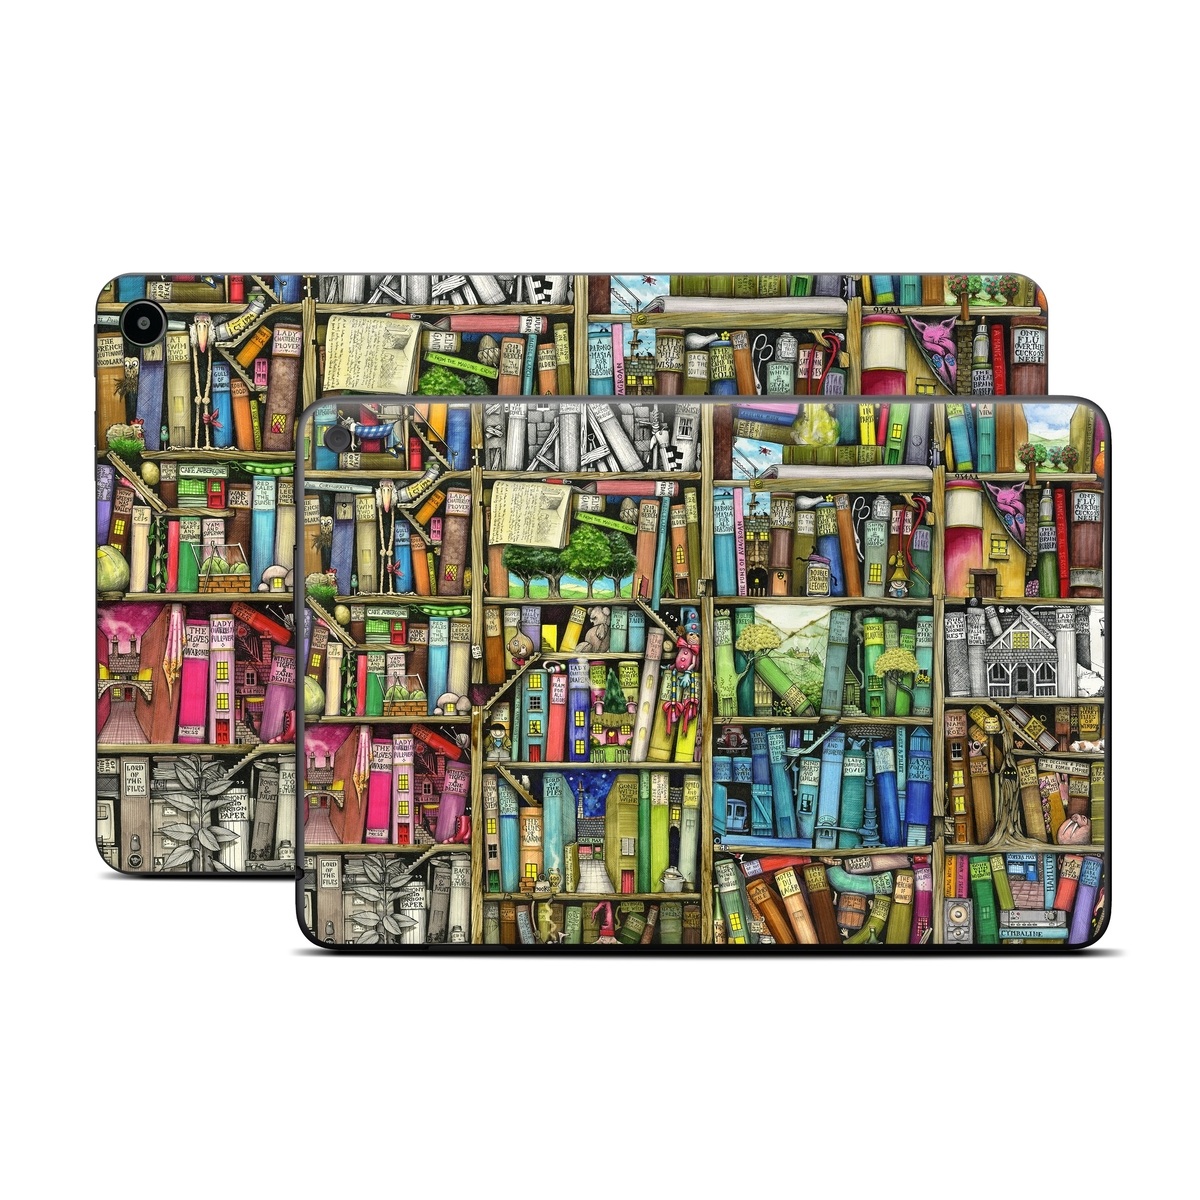 Amazon Fire Tablet Series Skin Skin design of Collection, Art, Visual arts, Bookselling, Shelving, Painting, Building, Shelf, Publication, Modern art, with brown, green, blue, red, pink colors